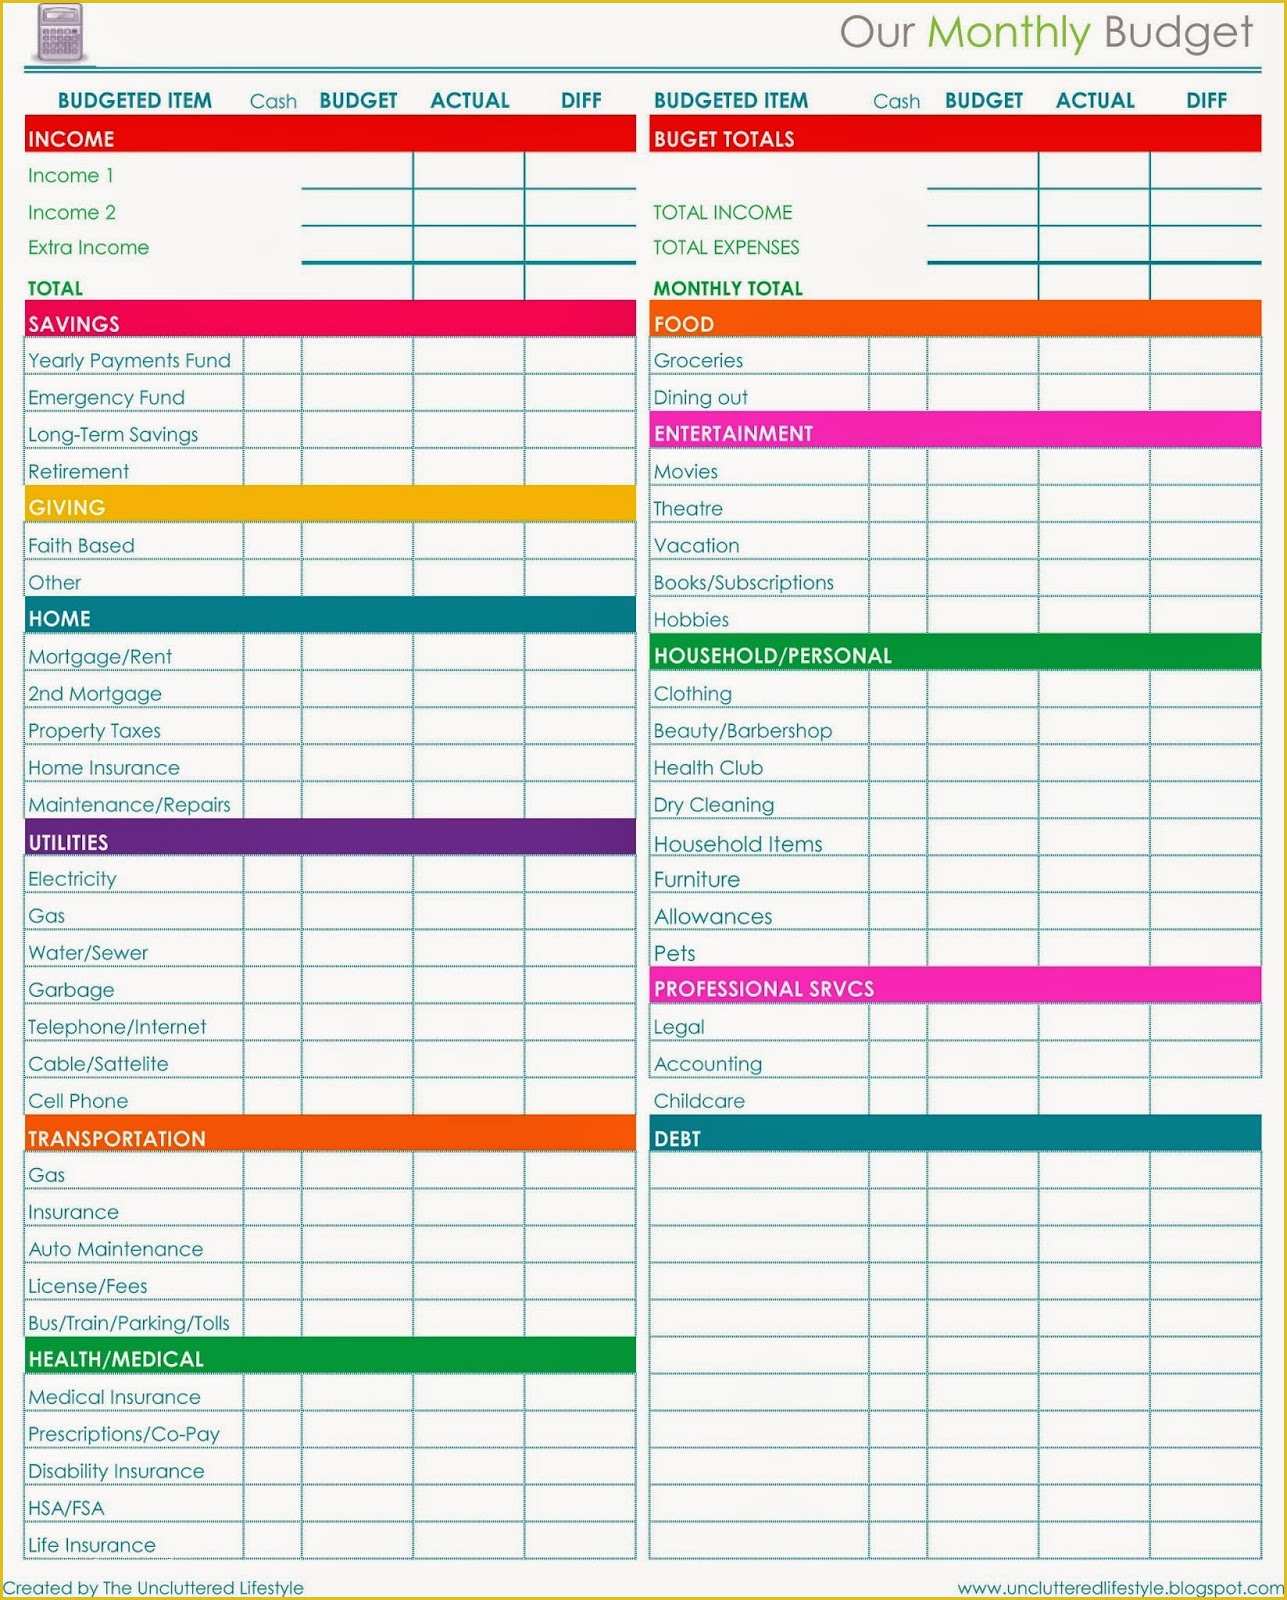 Financial Budget Template Free Of 2015 Planner More Free Printables Find Lifestyle